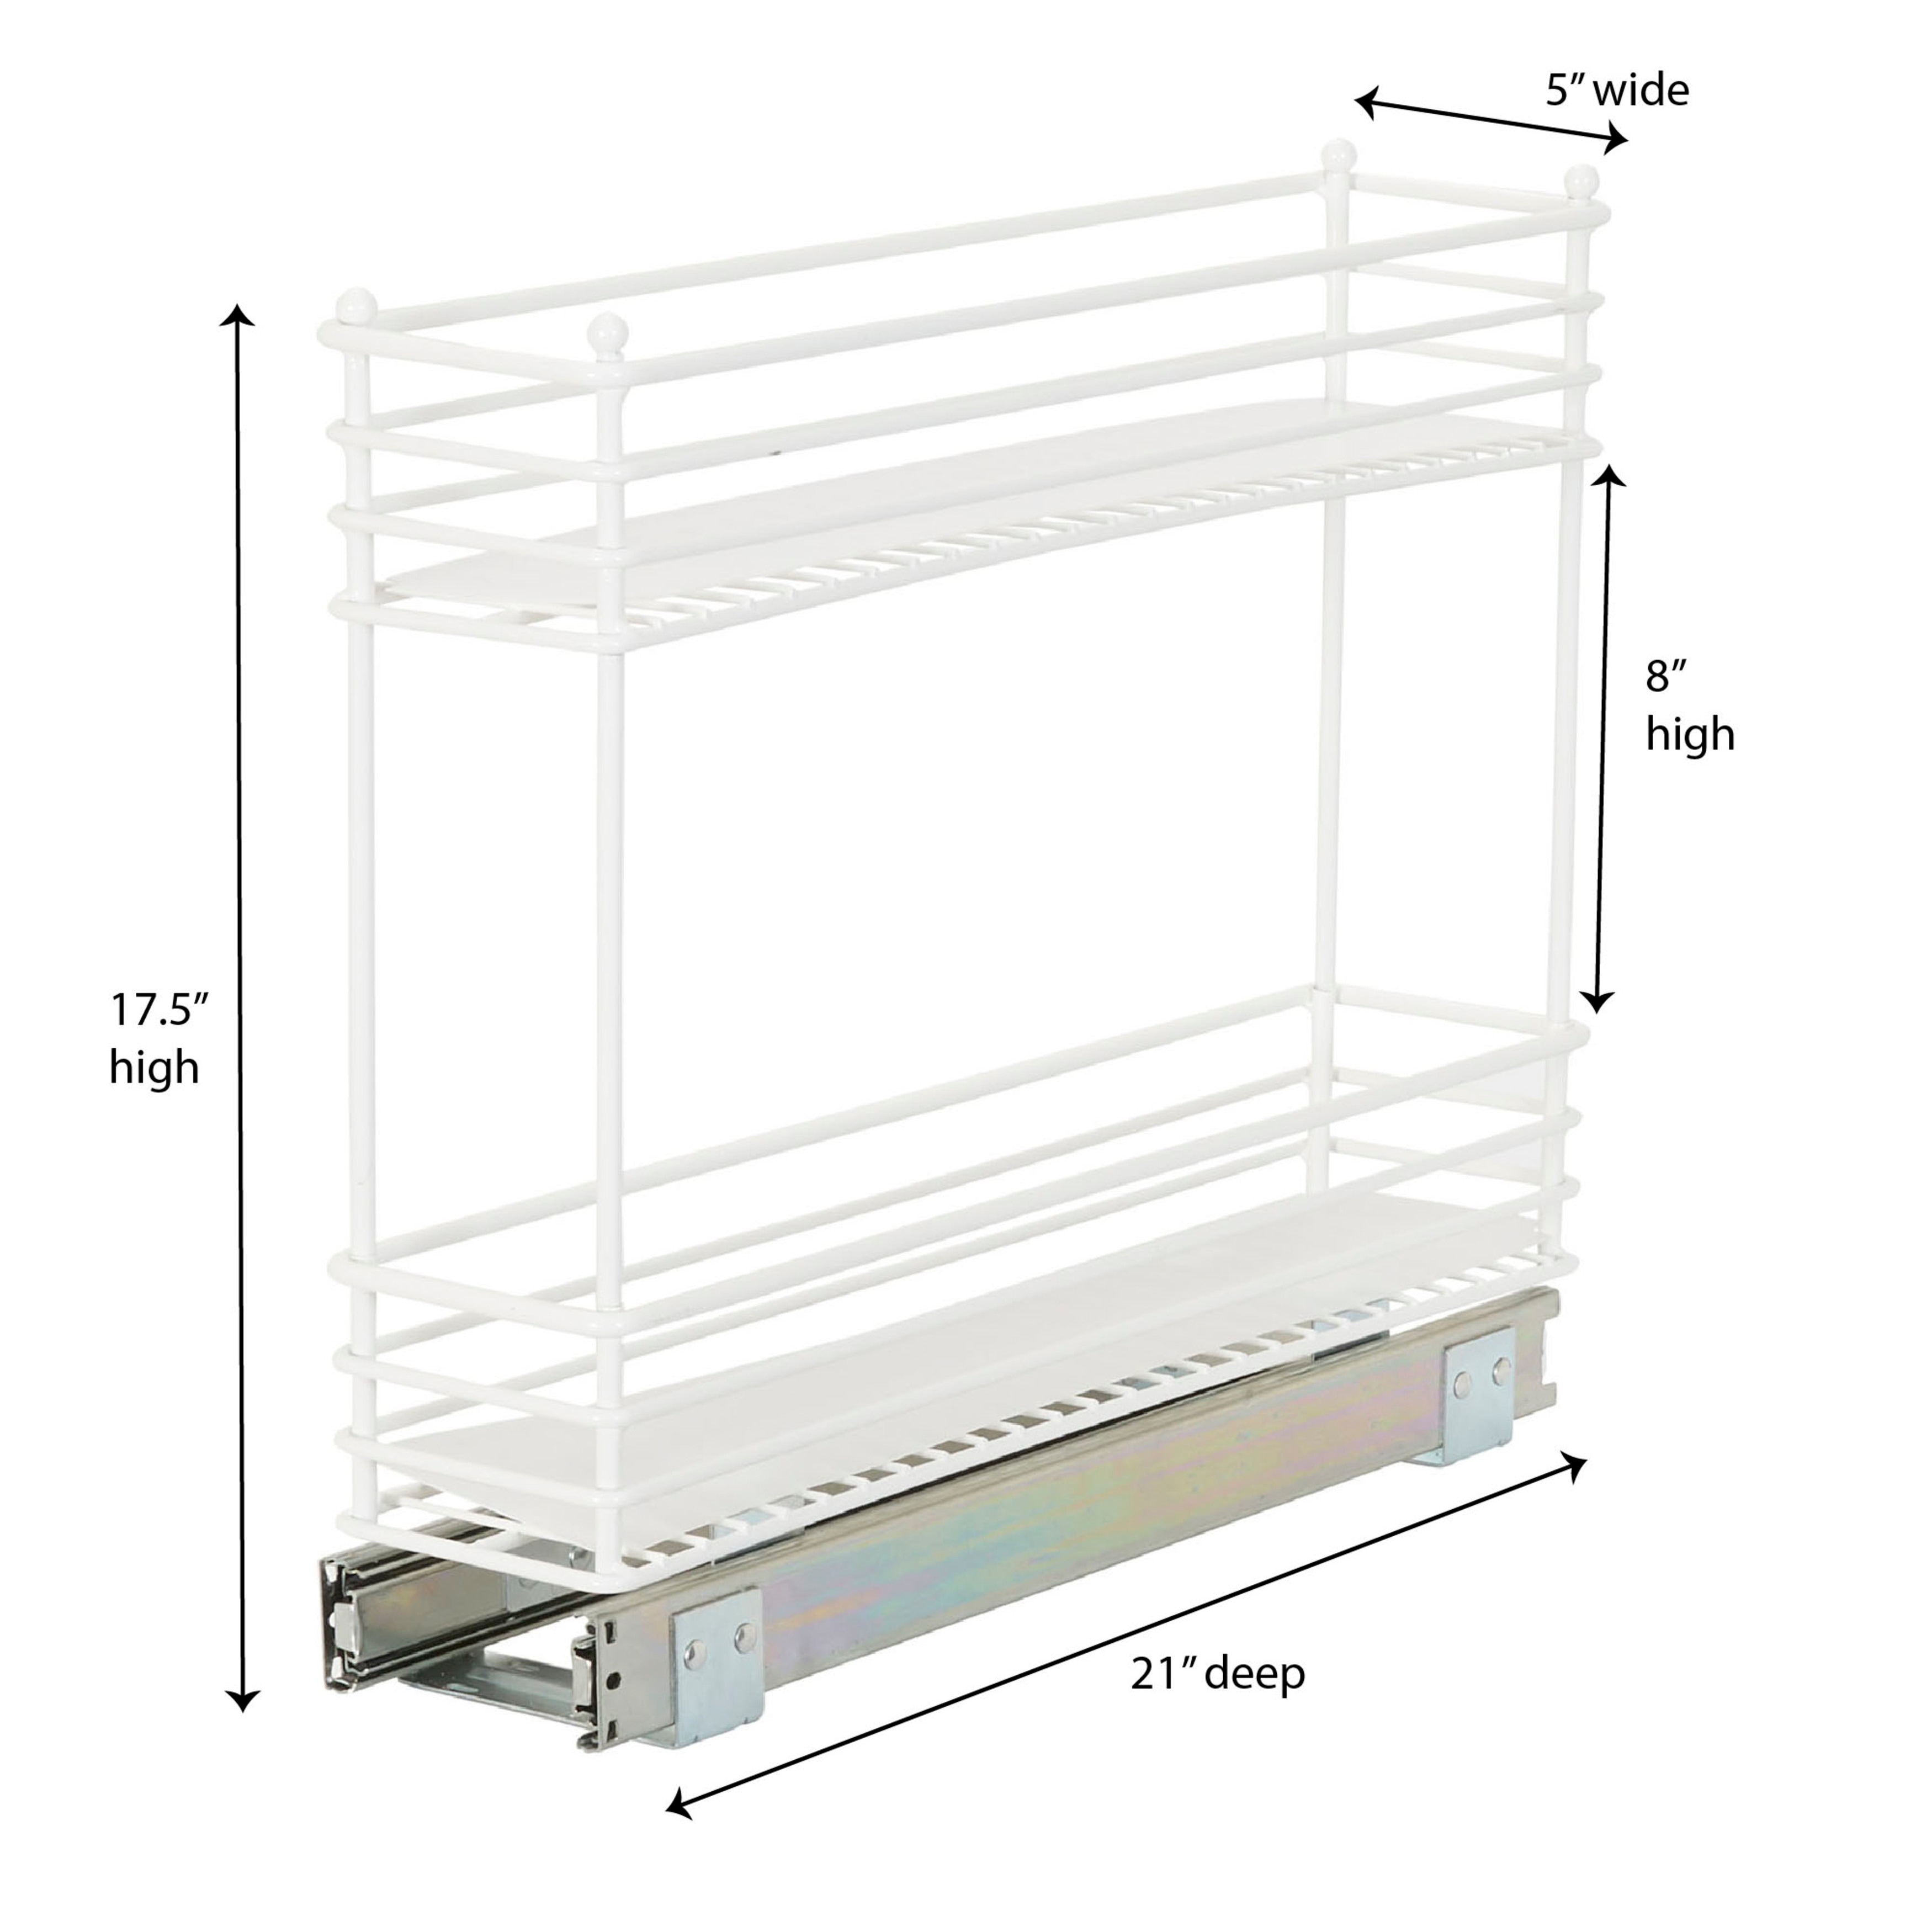 https://ak1.ostkcdn.com/images/products/is/images/direct/914b71ec65dbc54b01786812b95c66b39ef2a736/Narrow-Sliding-Cabinet-Organizer%2C-Two-Tier-Organizer%2C-White%2C-Great-for-Slim-Cabinets-in-Kitchen%2C-Bathroom-and-More.jpg